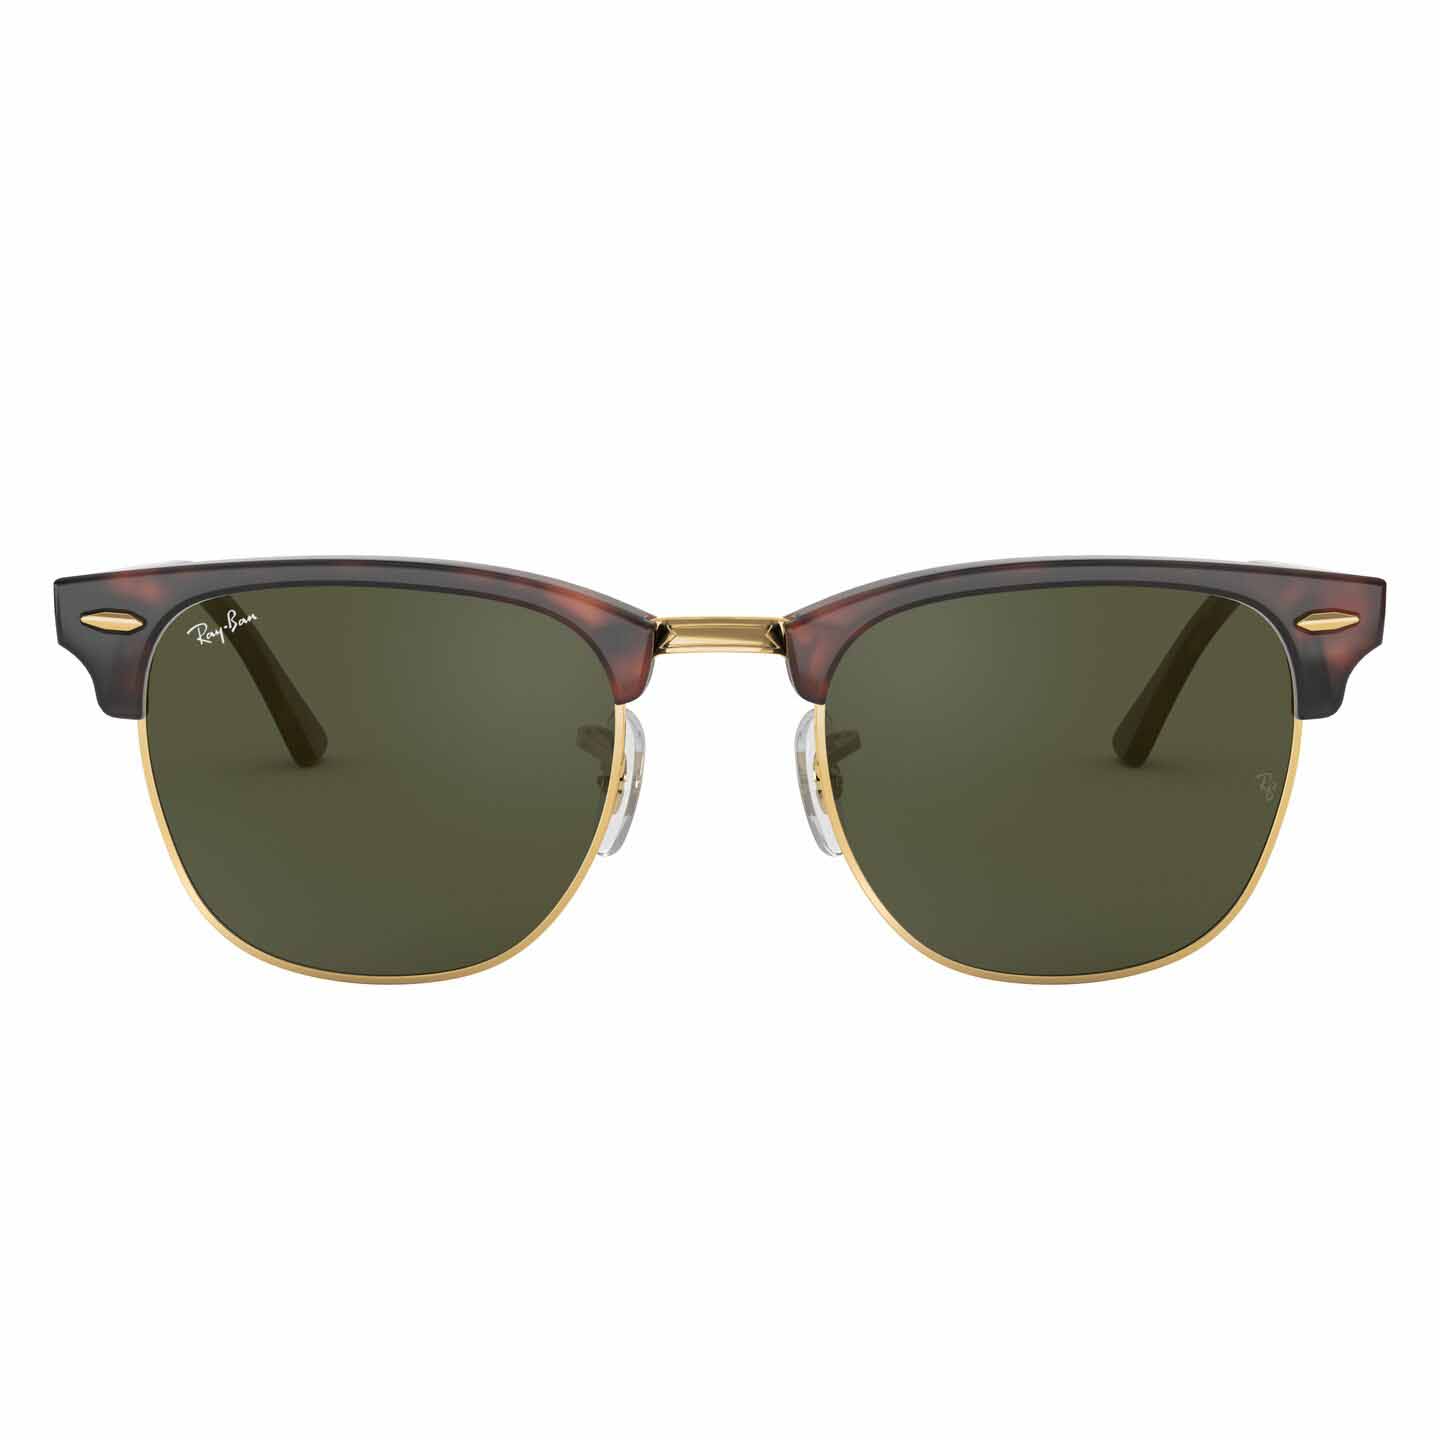 Co Ray-Ban TOX Sunglasses CLUBMASTER RB3016 W0366 51 MOCK TORTOISE ON ARISTA/G-15 GREEN